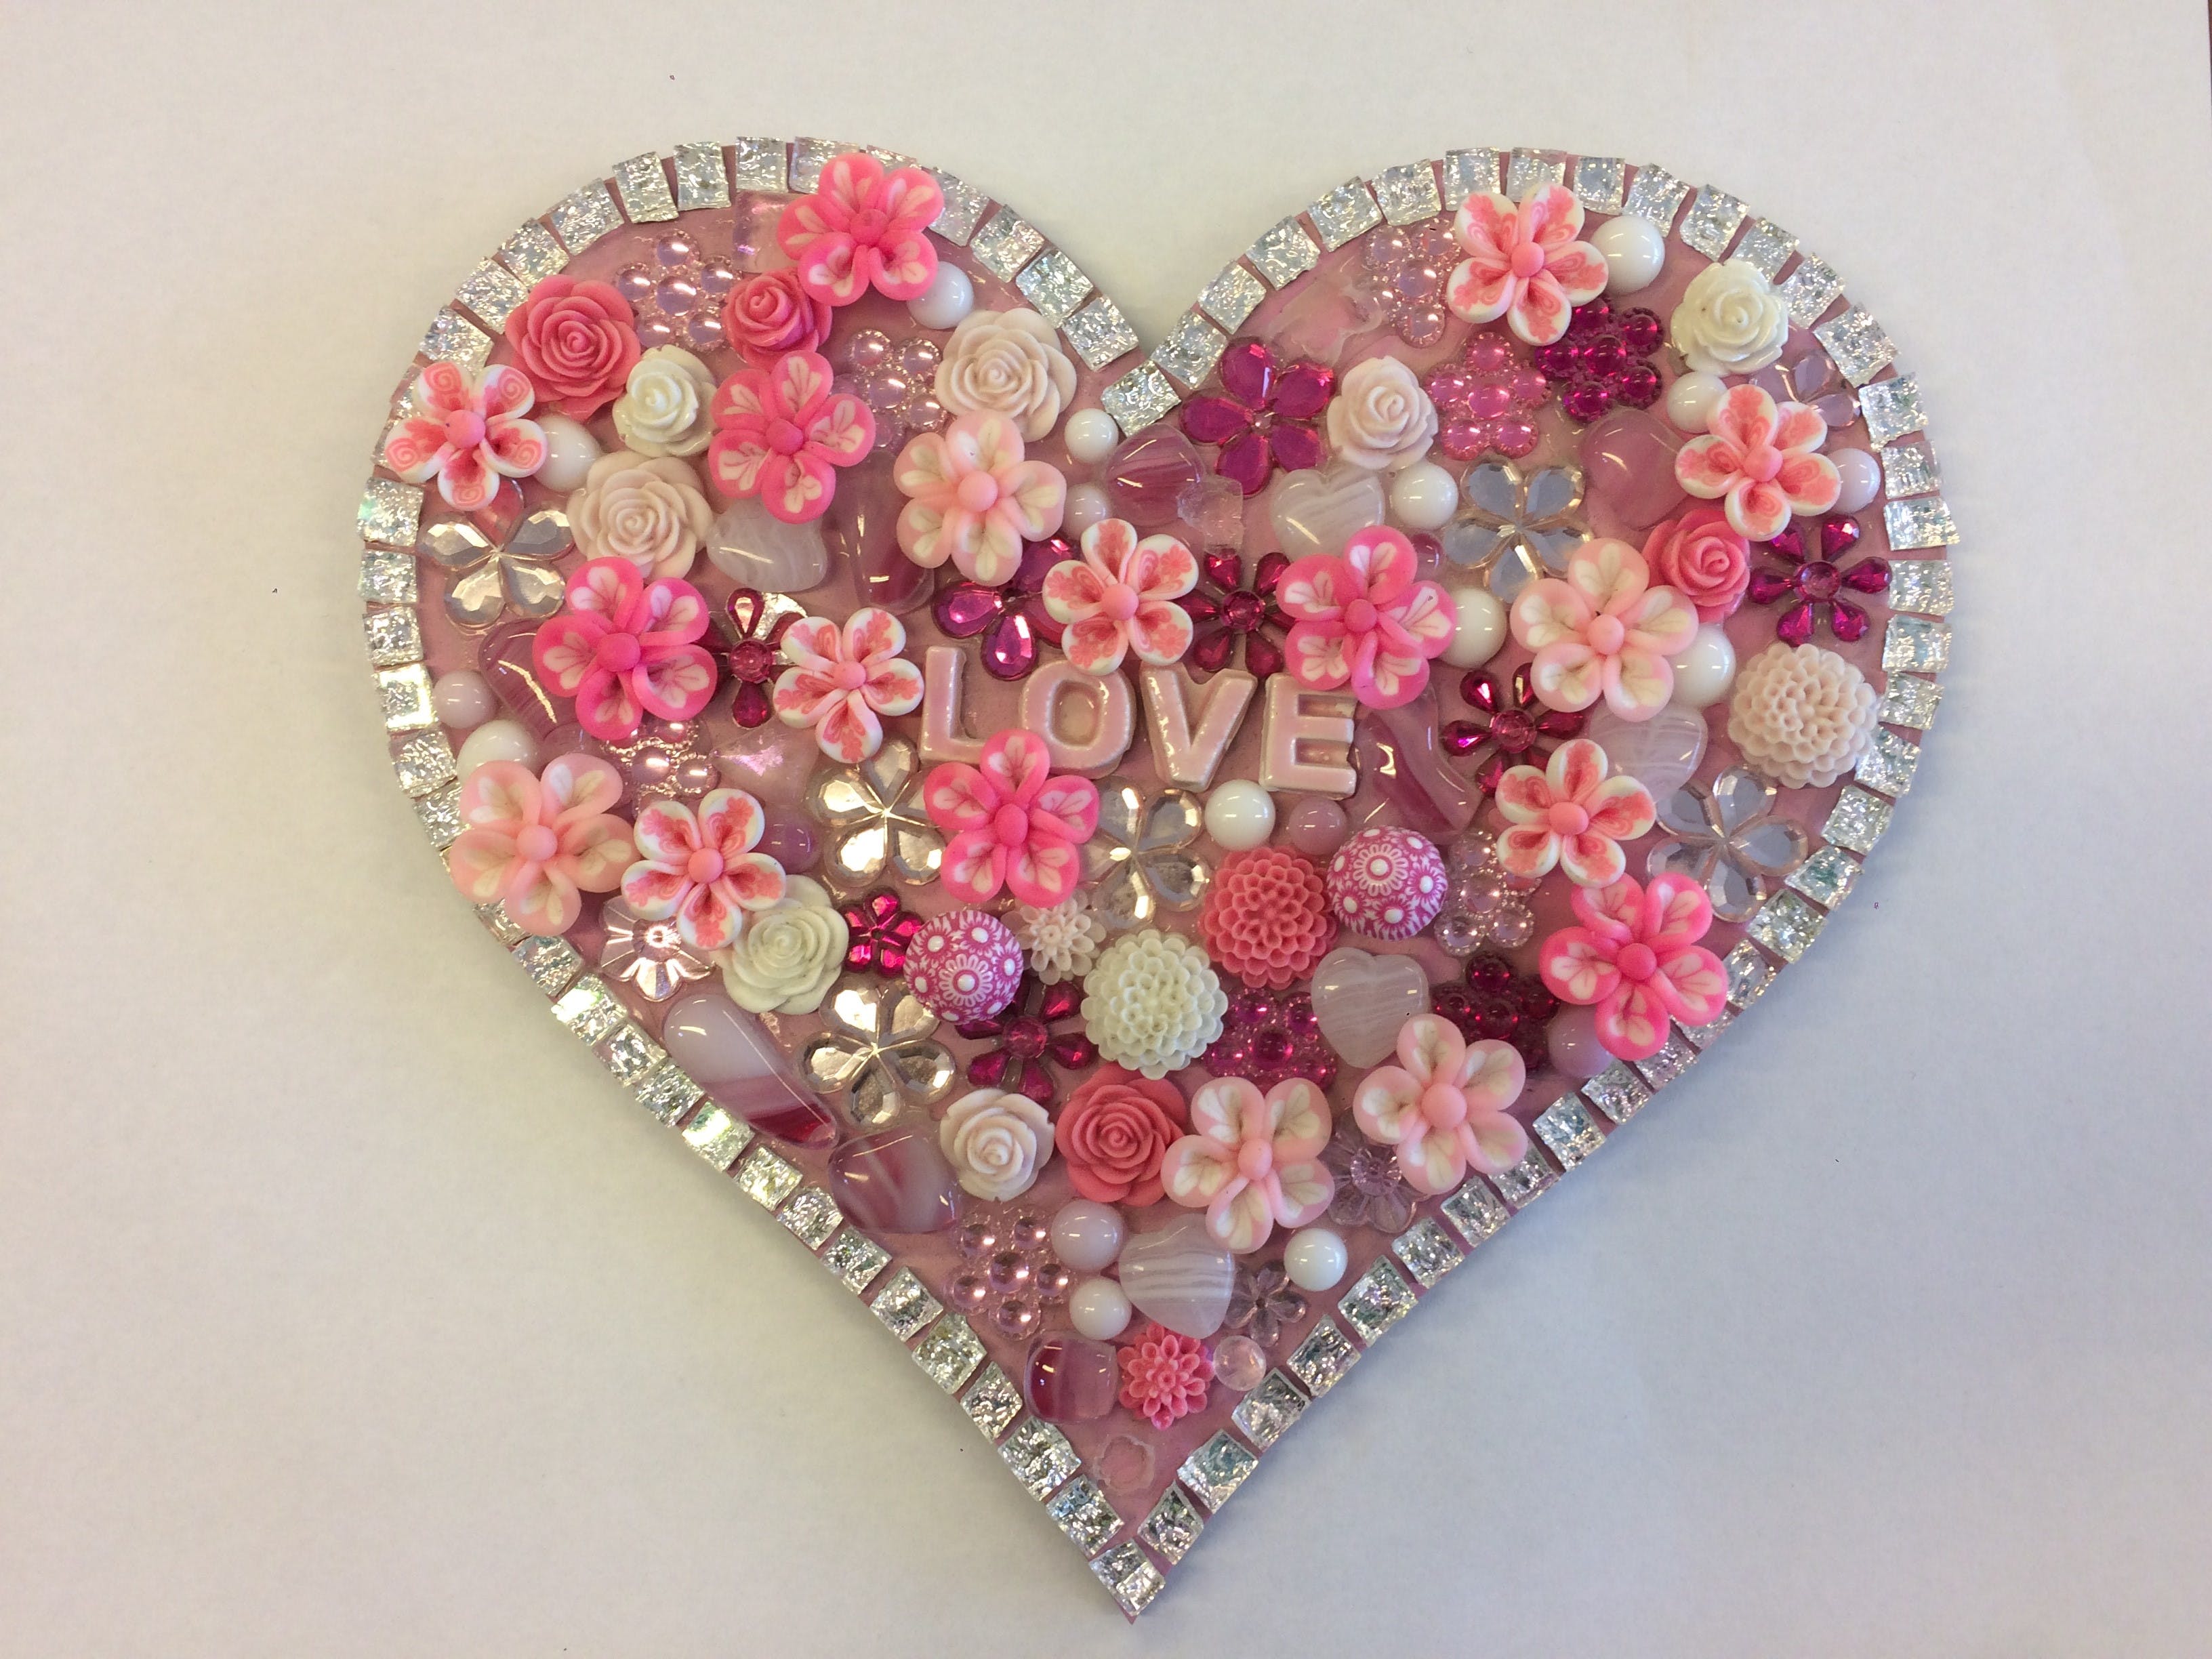 Flowers and Bling Mosaic Class for Kids - Geraldton Accommodation